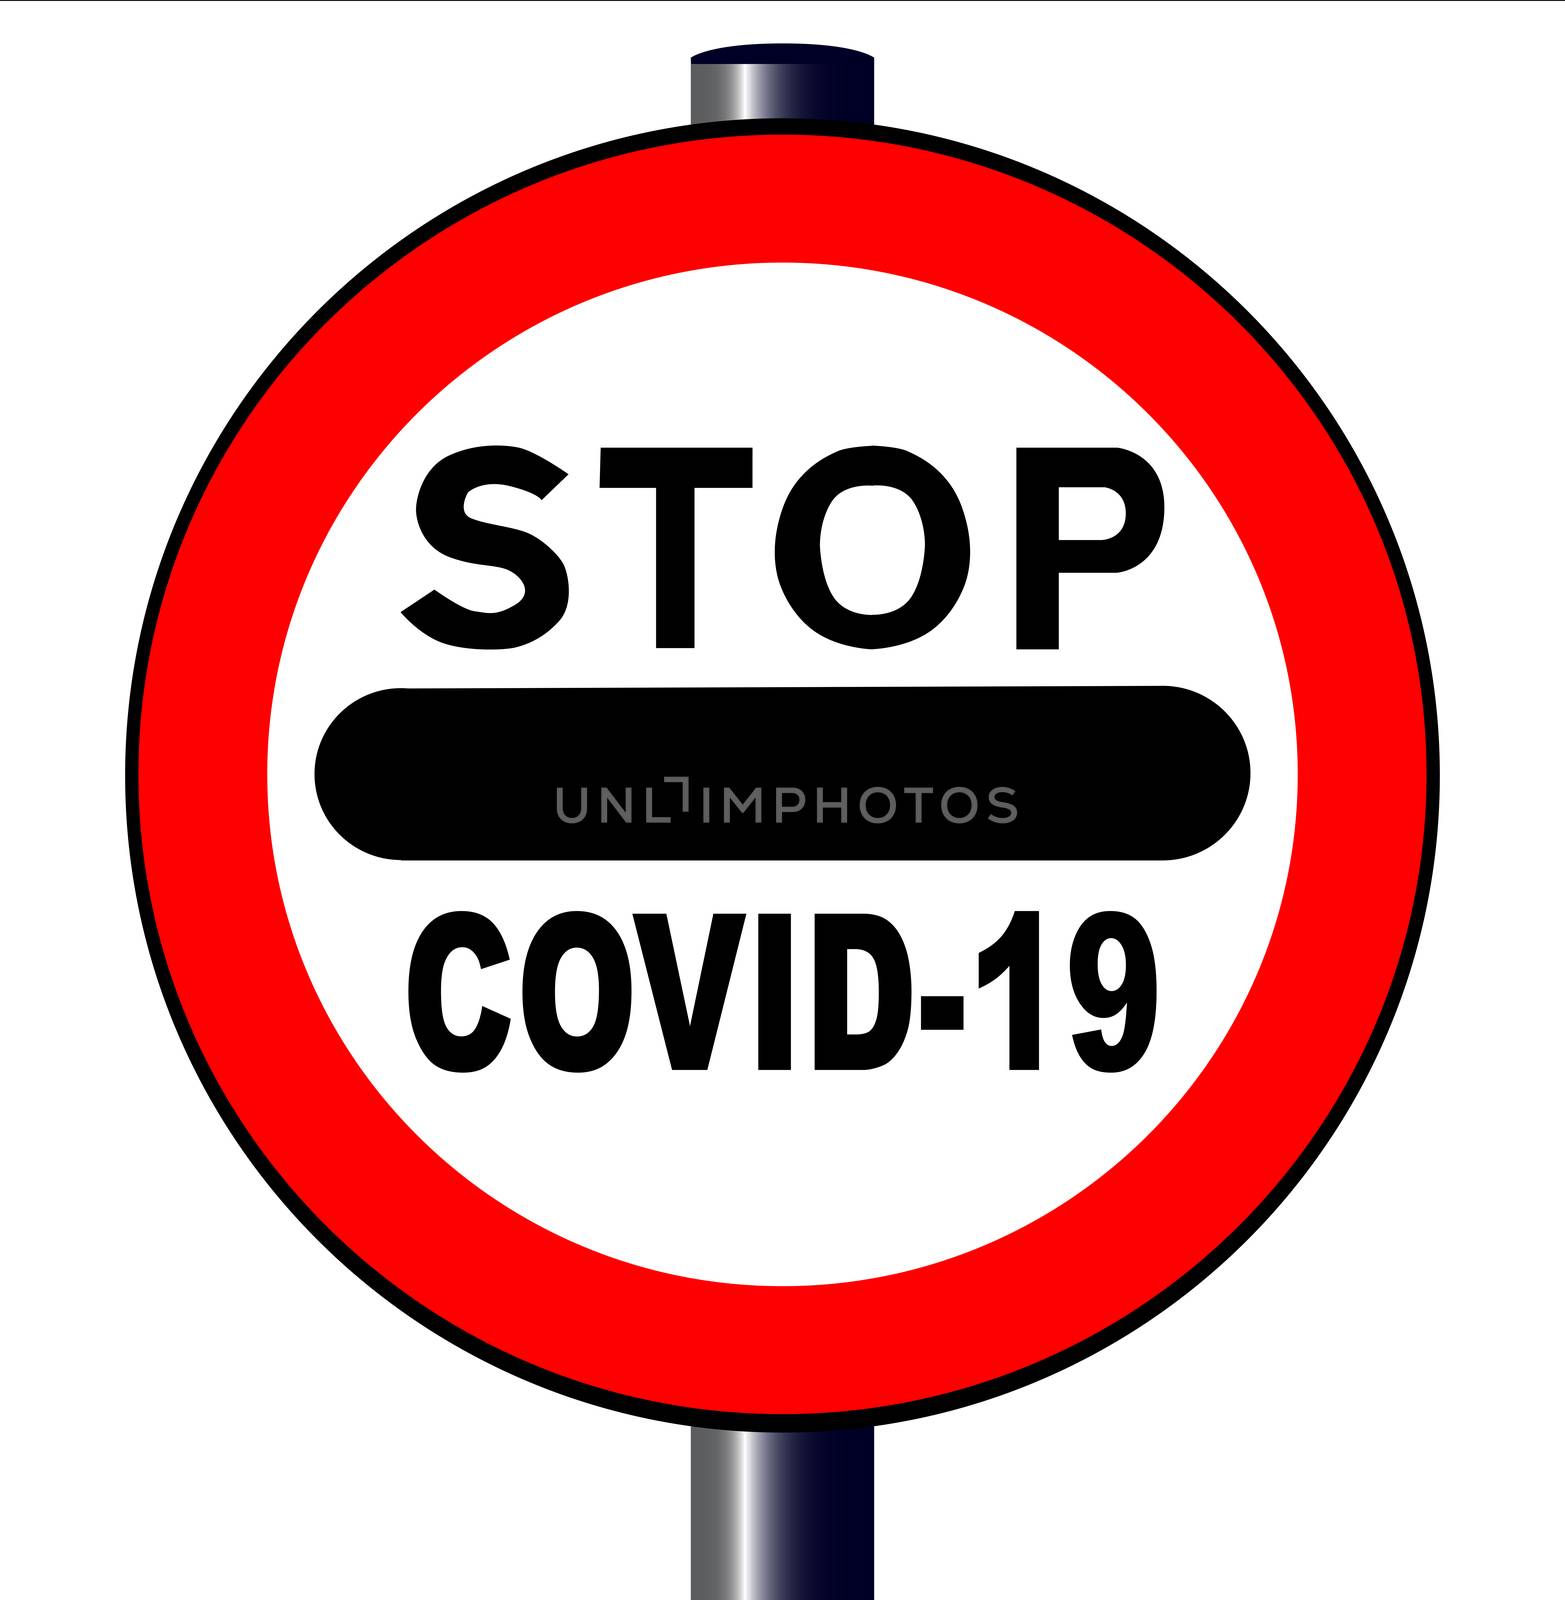 A large stop Covid-19 sign isolated over a white background